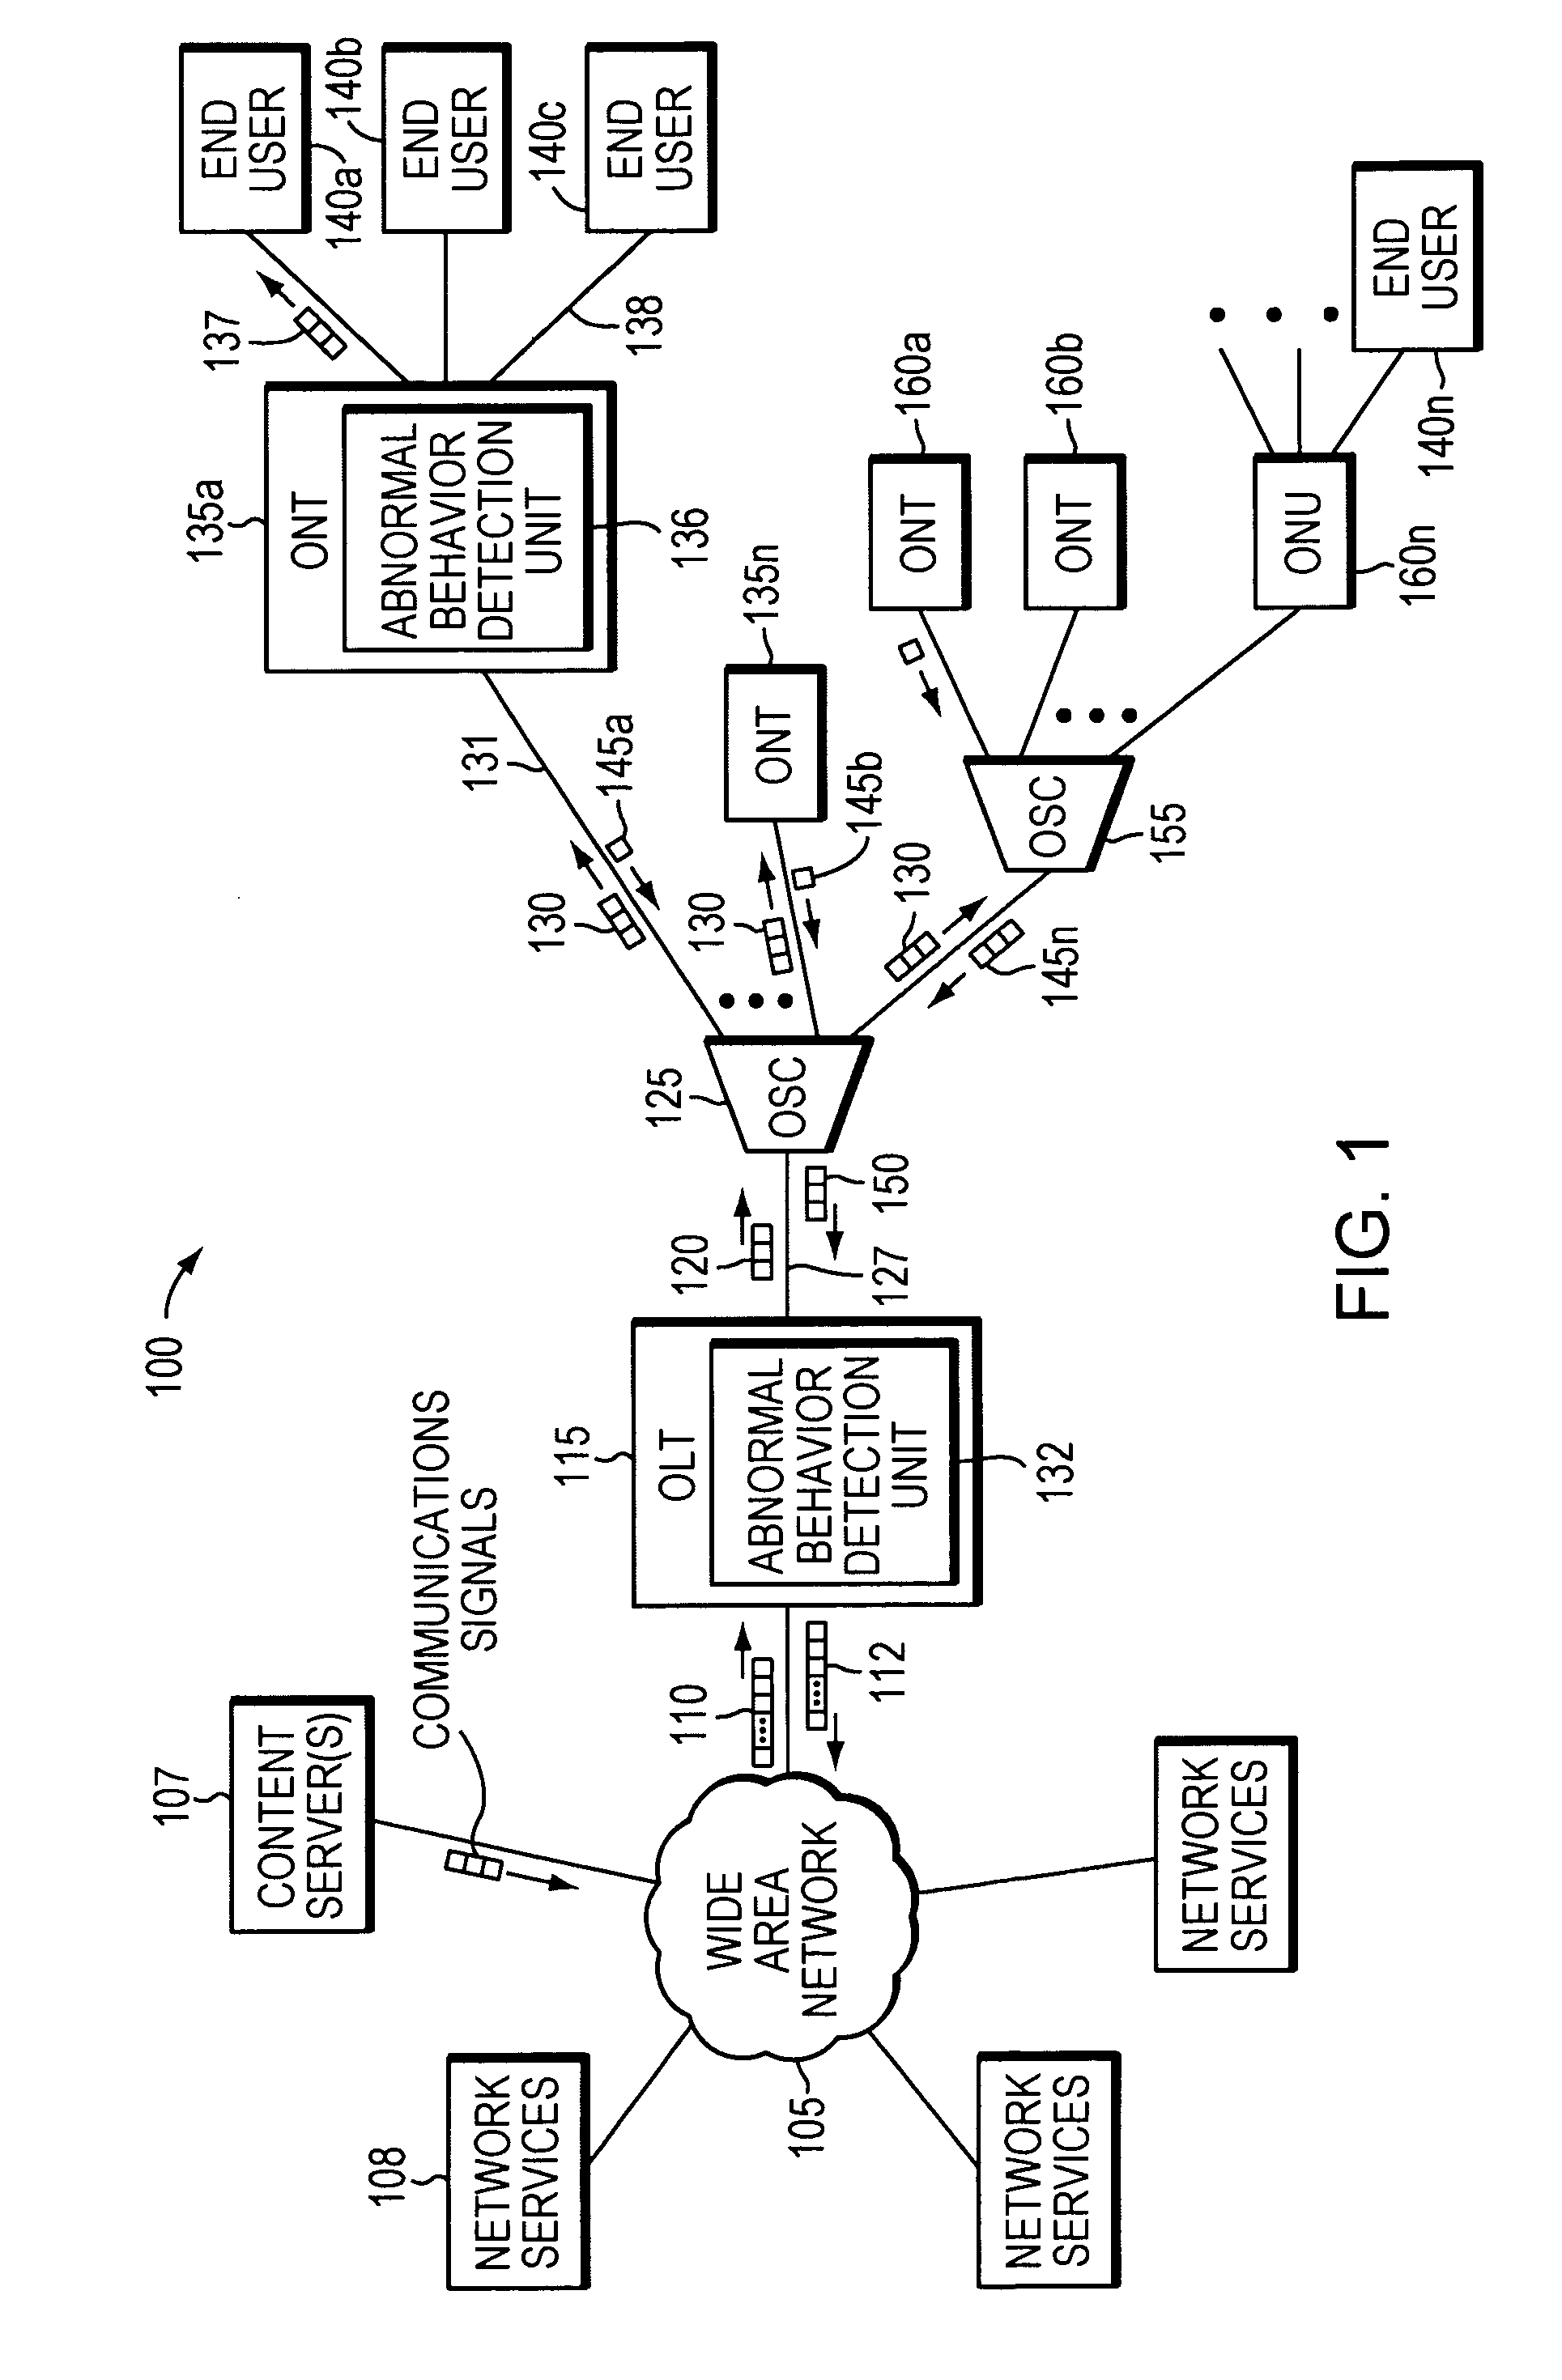 Method and apparatus of detecting abnormal behavior in a passive optical network (PON)